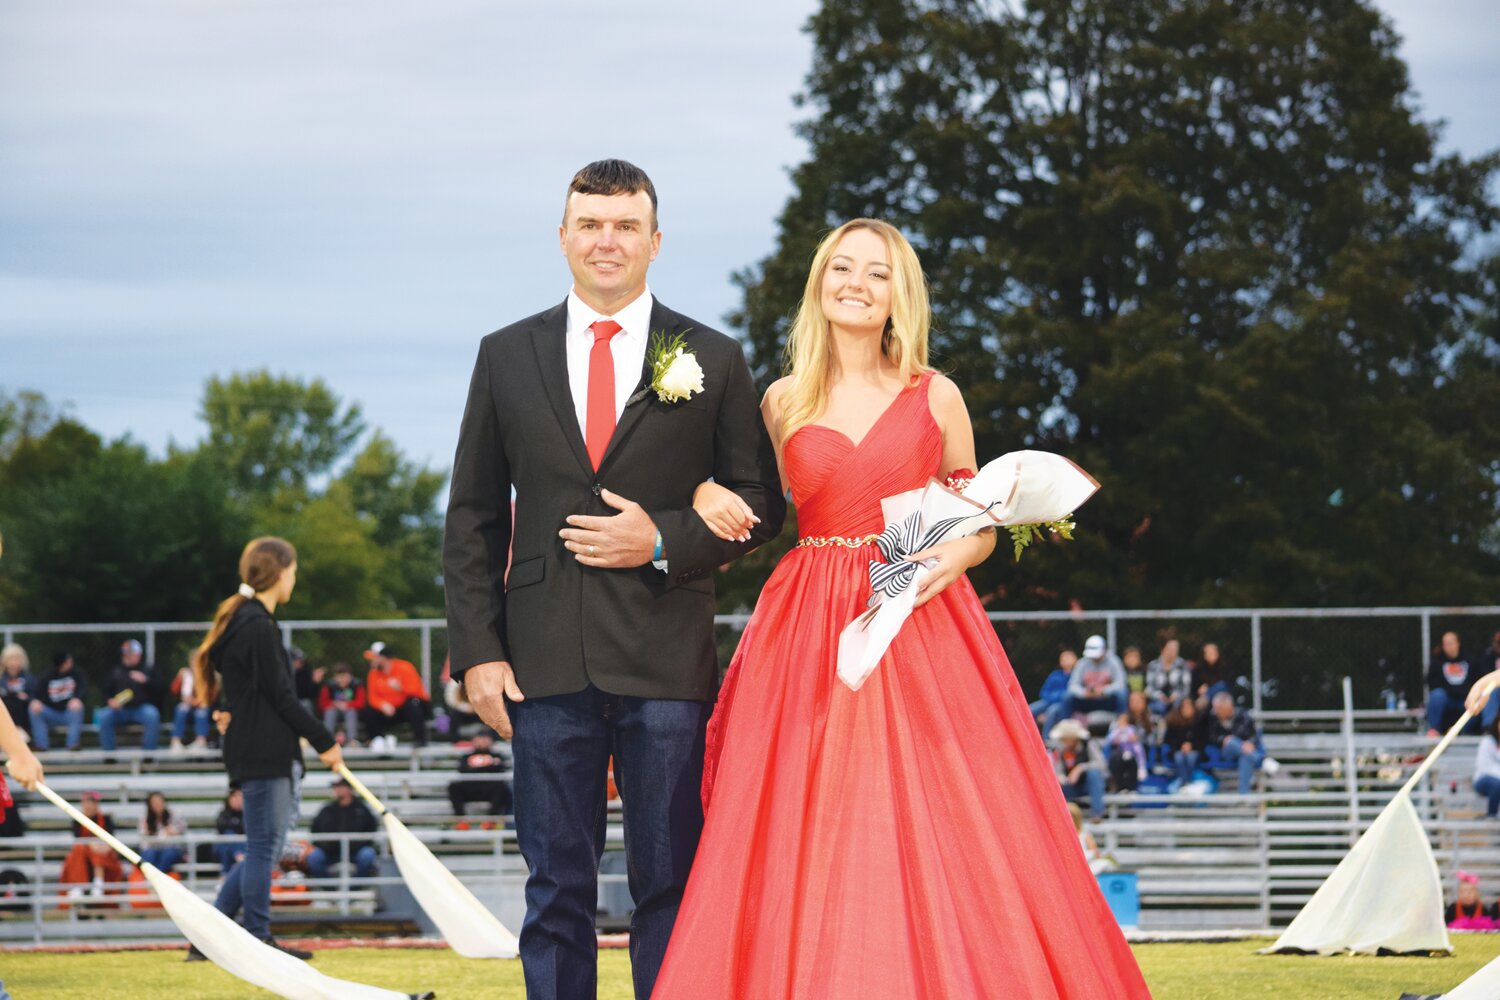 Senior Maid, Valerie Russell, was escorted by her father, Dustin Russell.